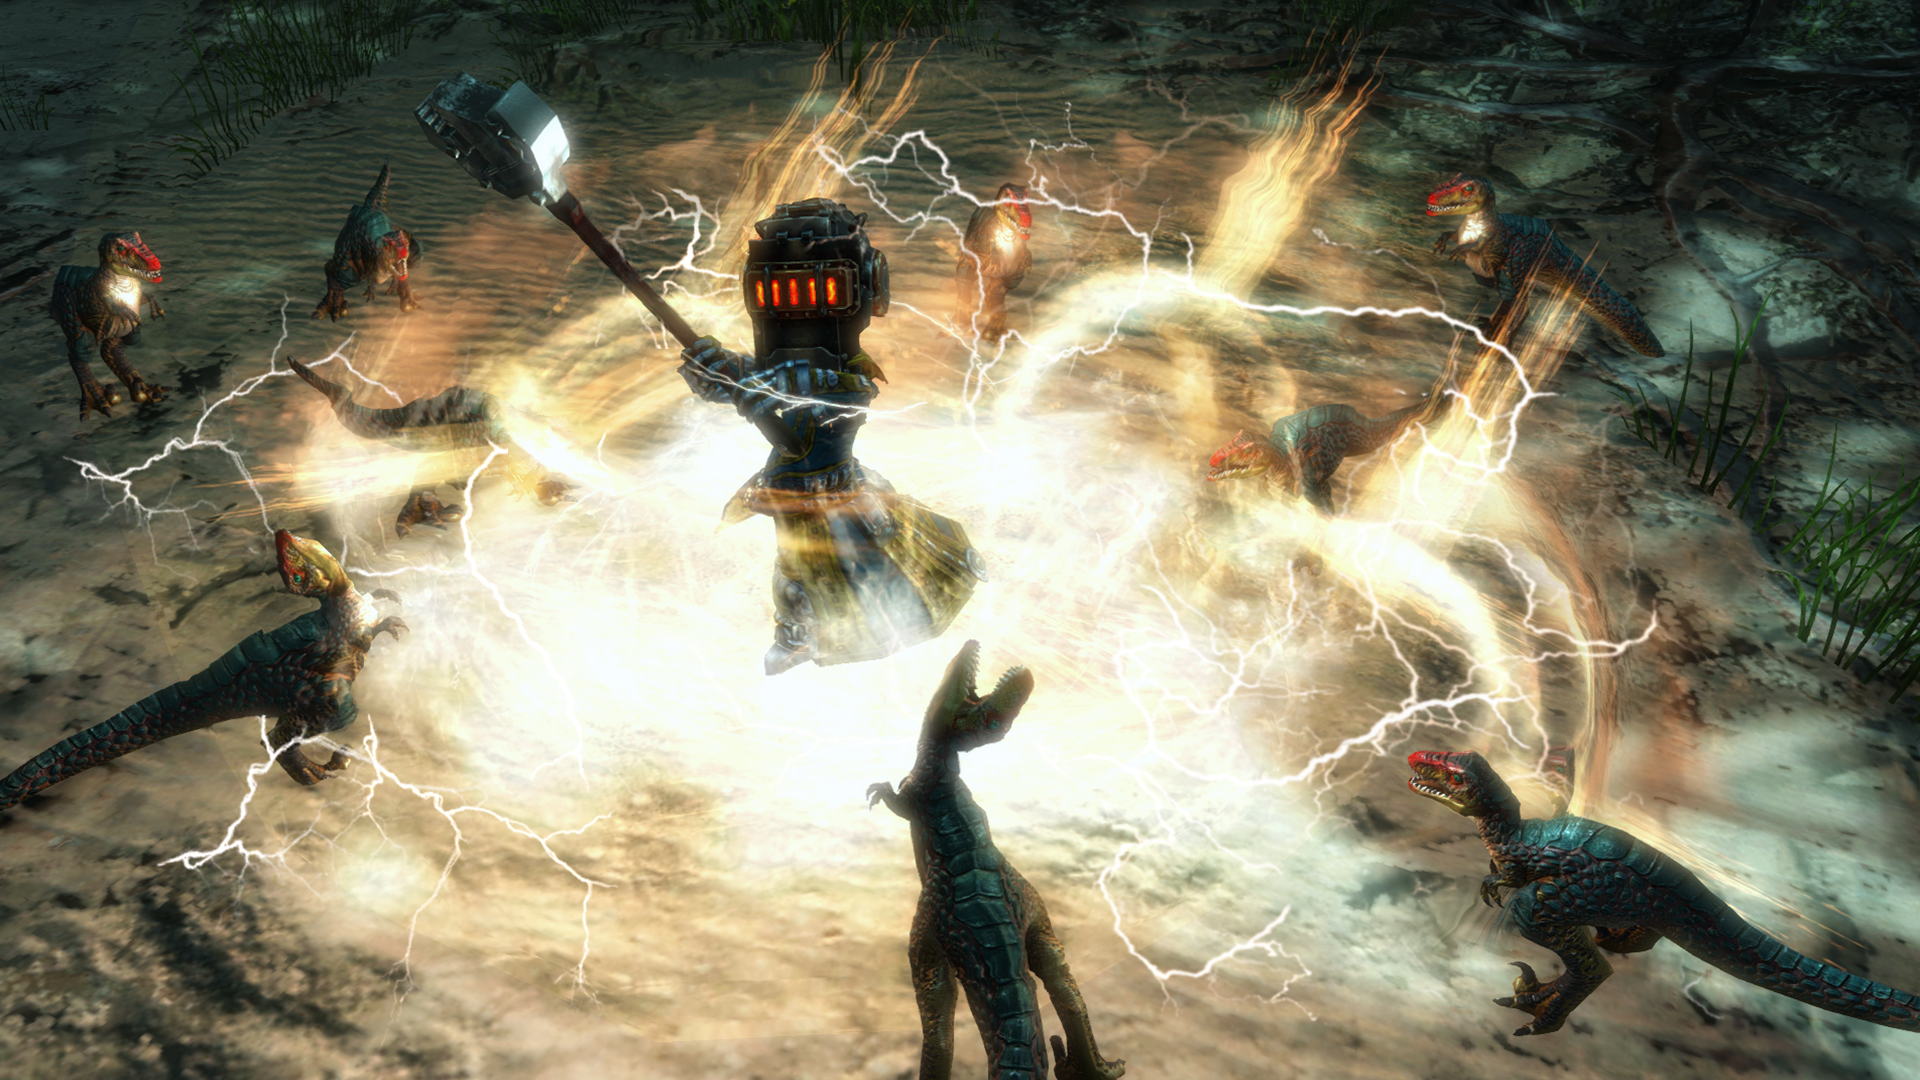 gw2hot_09_2015_weapon_skill_2_electro_whirl